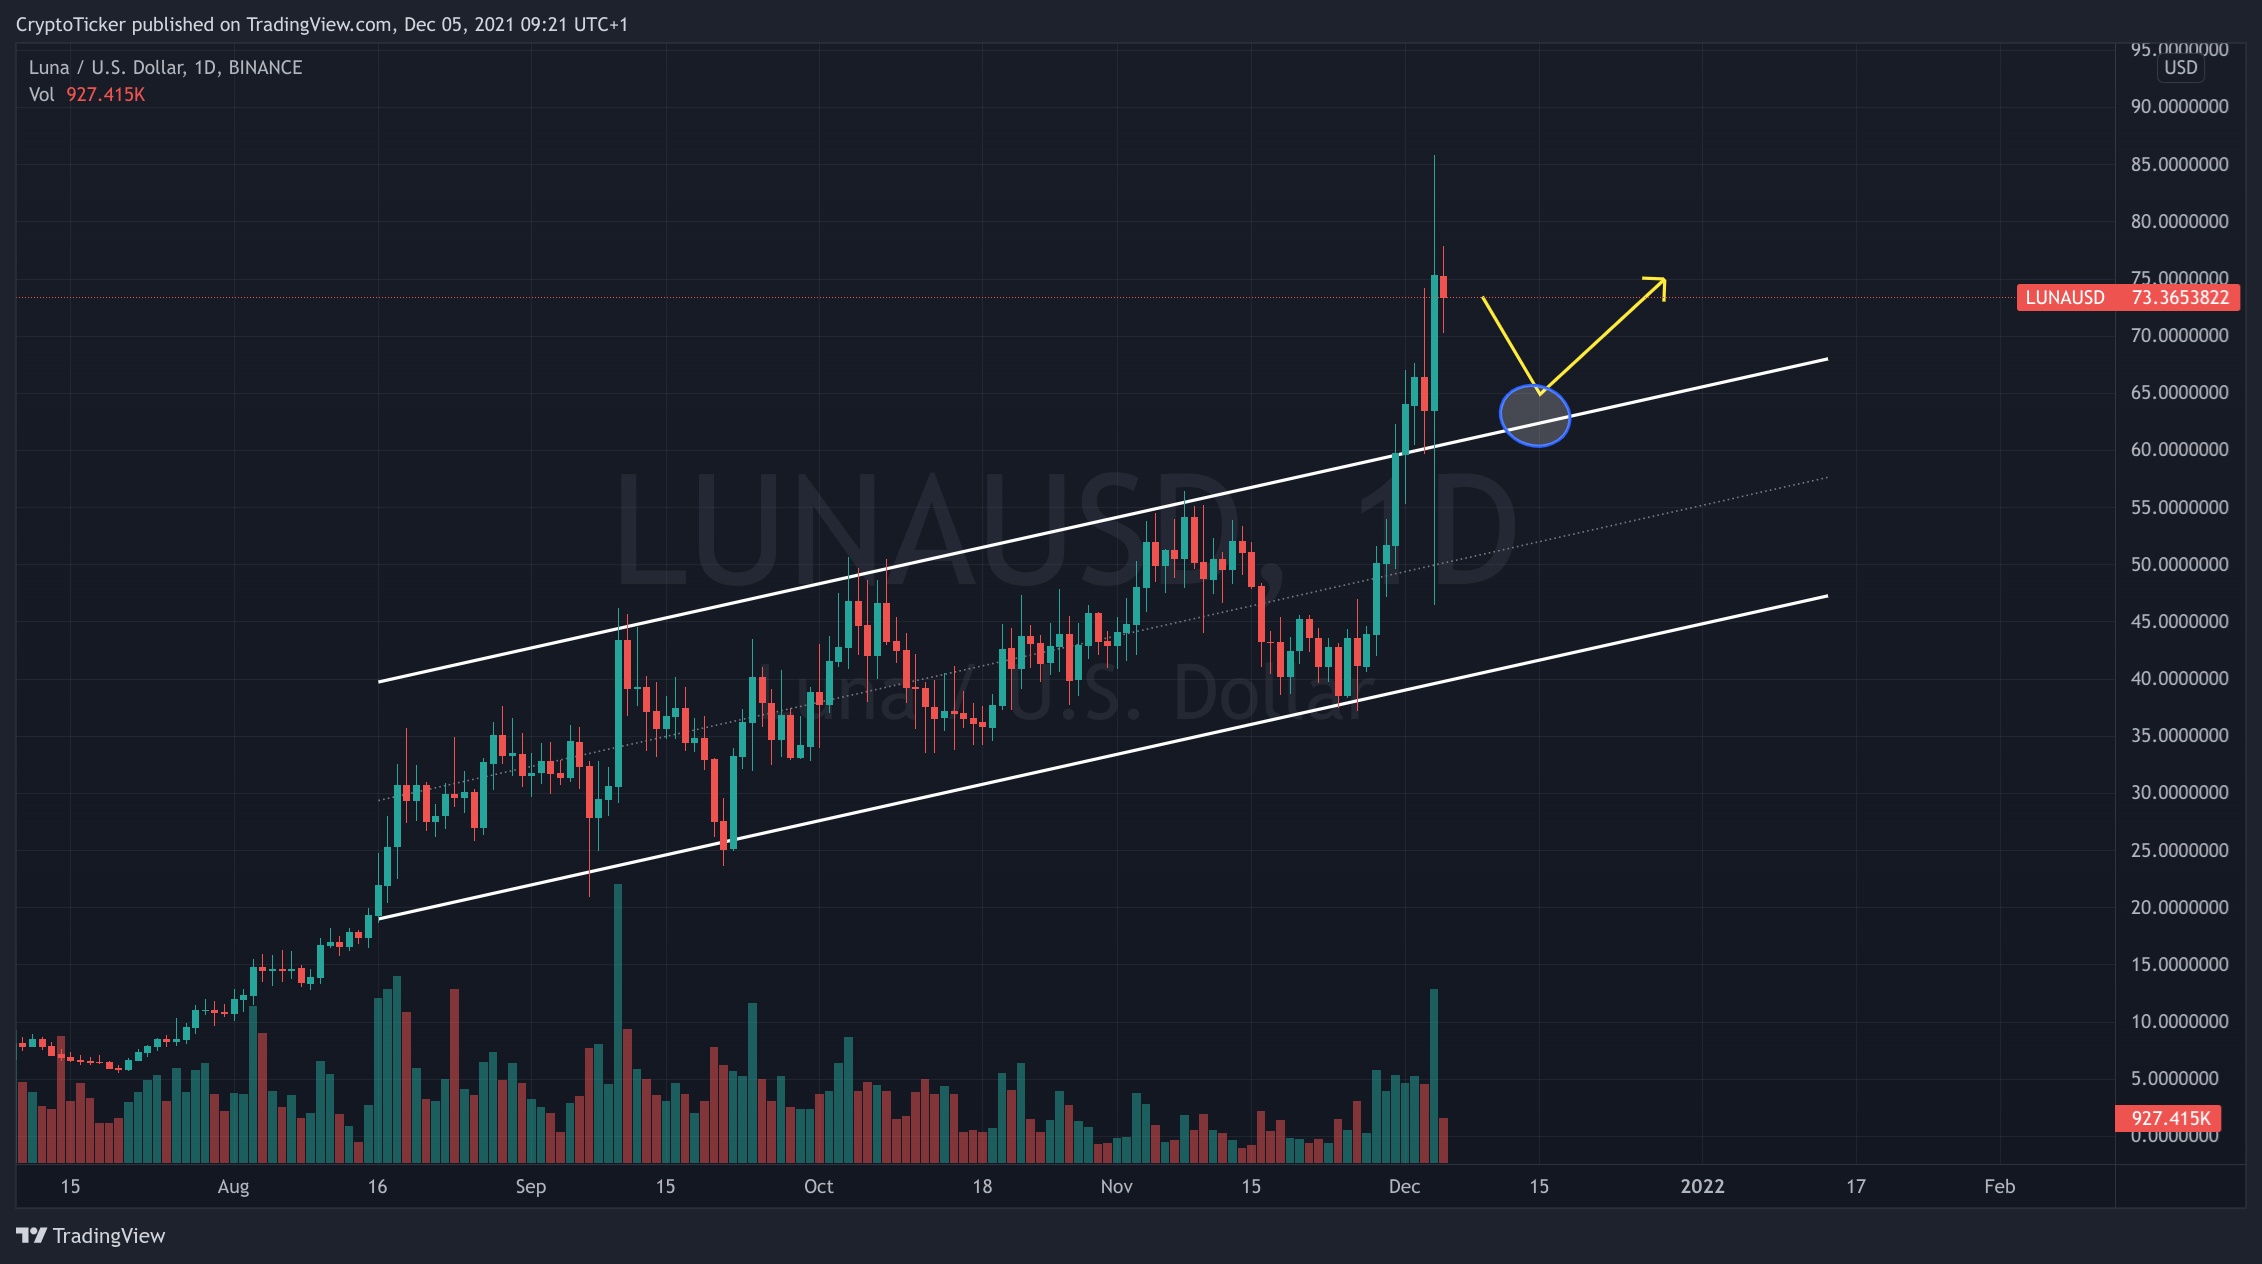 LUNA/USD 1-day chart showing the potential adjustment in LUNA prices